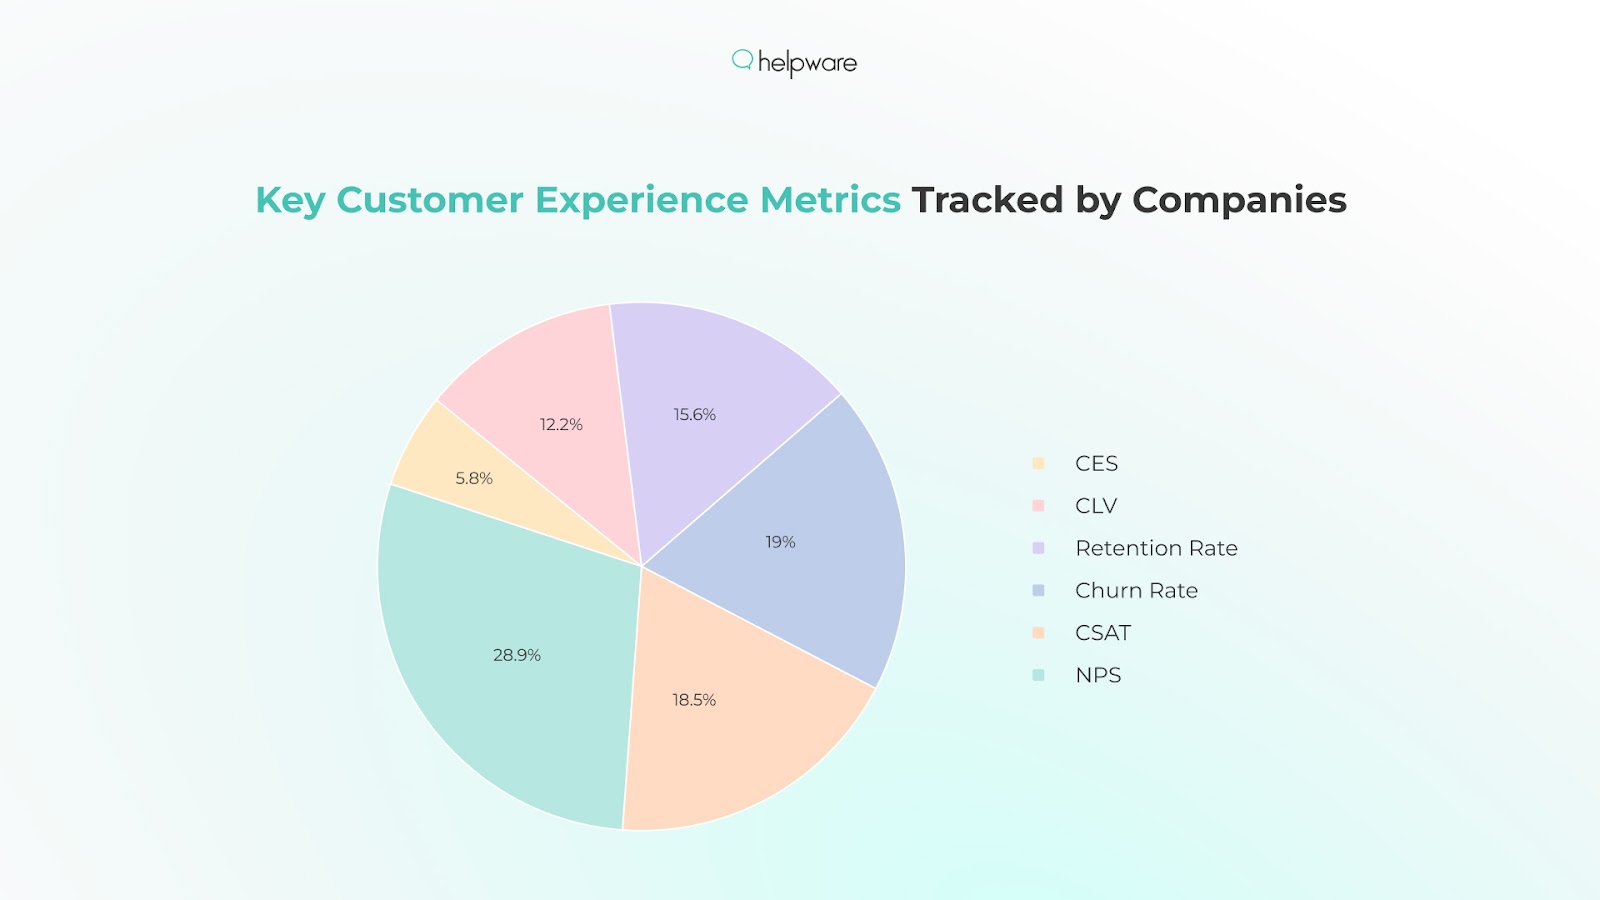 Key Customer Experience Metrics Tracked by Companies: CES, CLV, Retention Rate, Churn Rate, CSAT, NPS